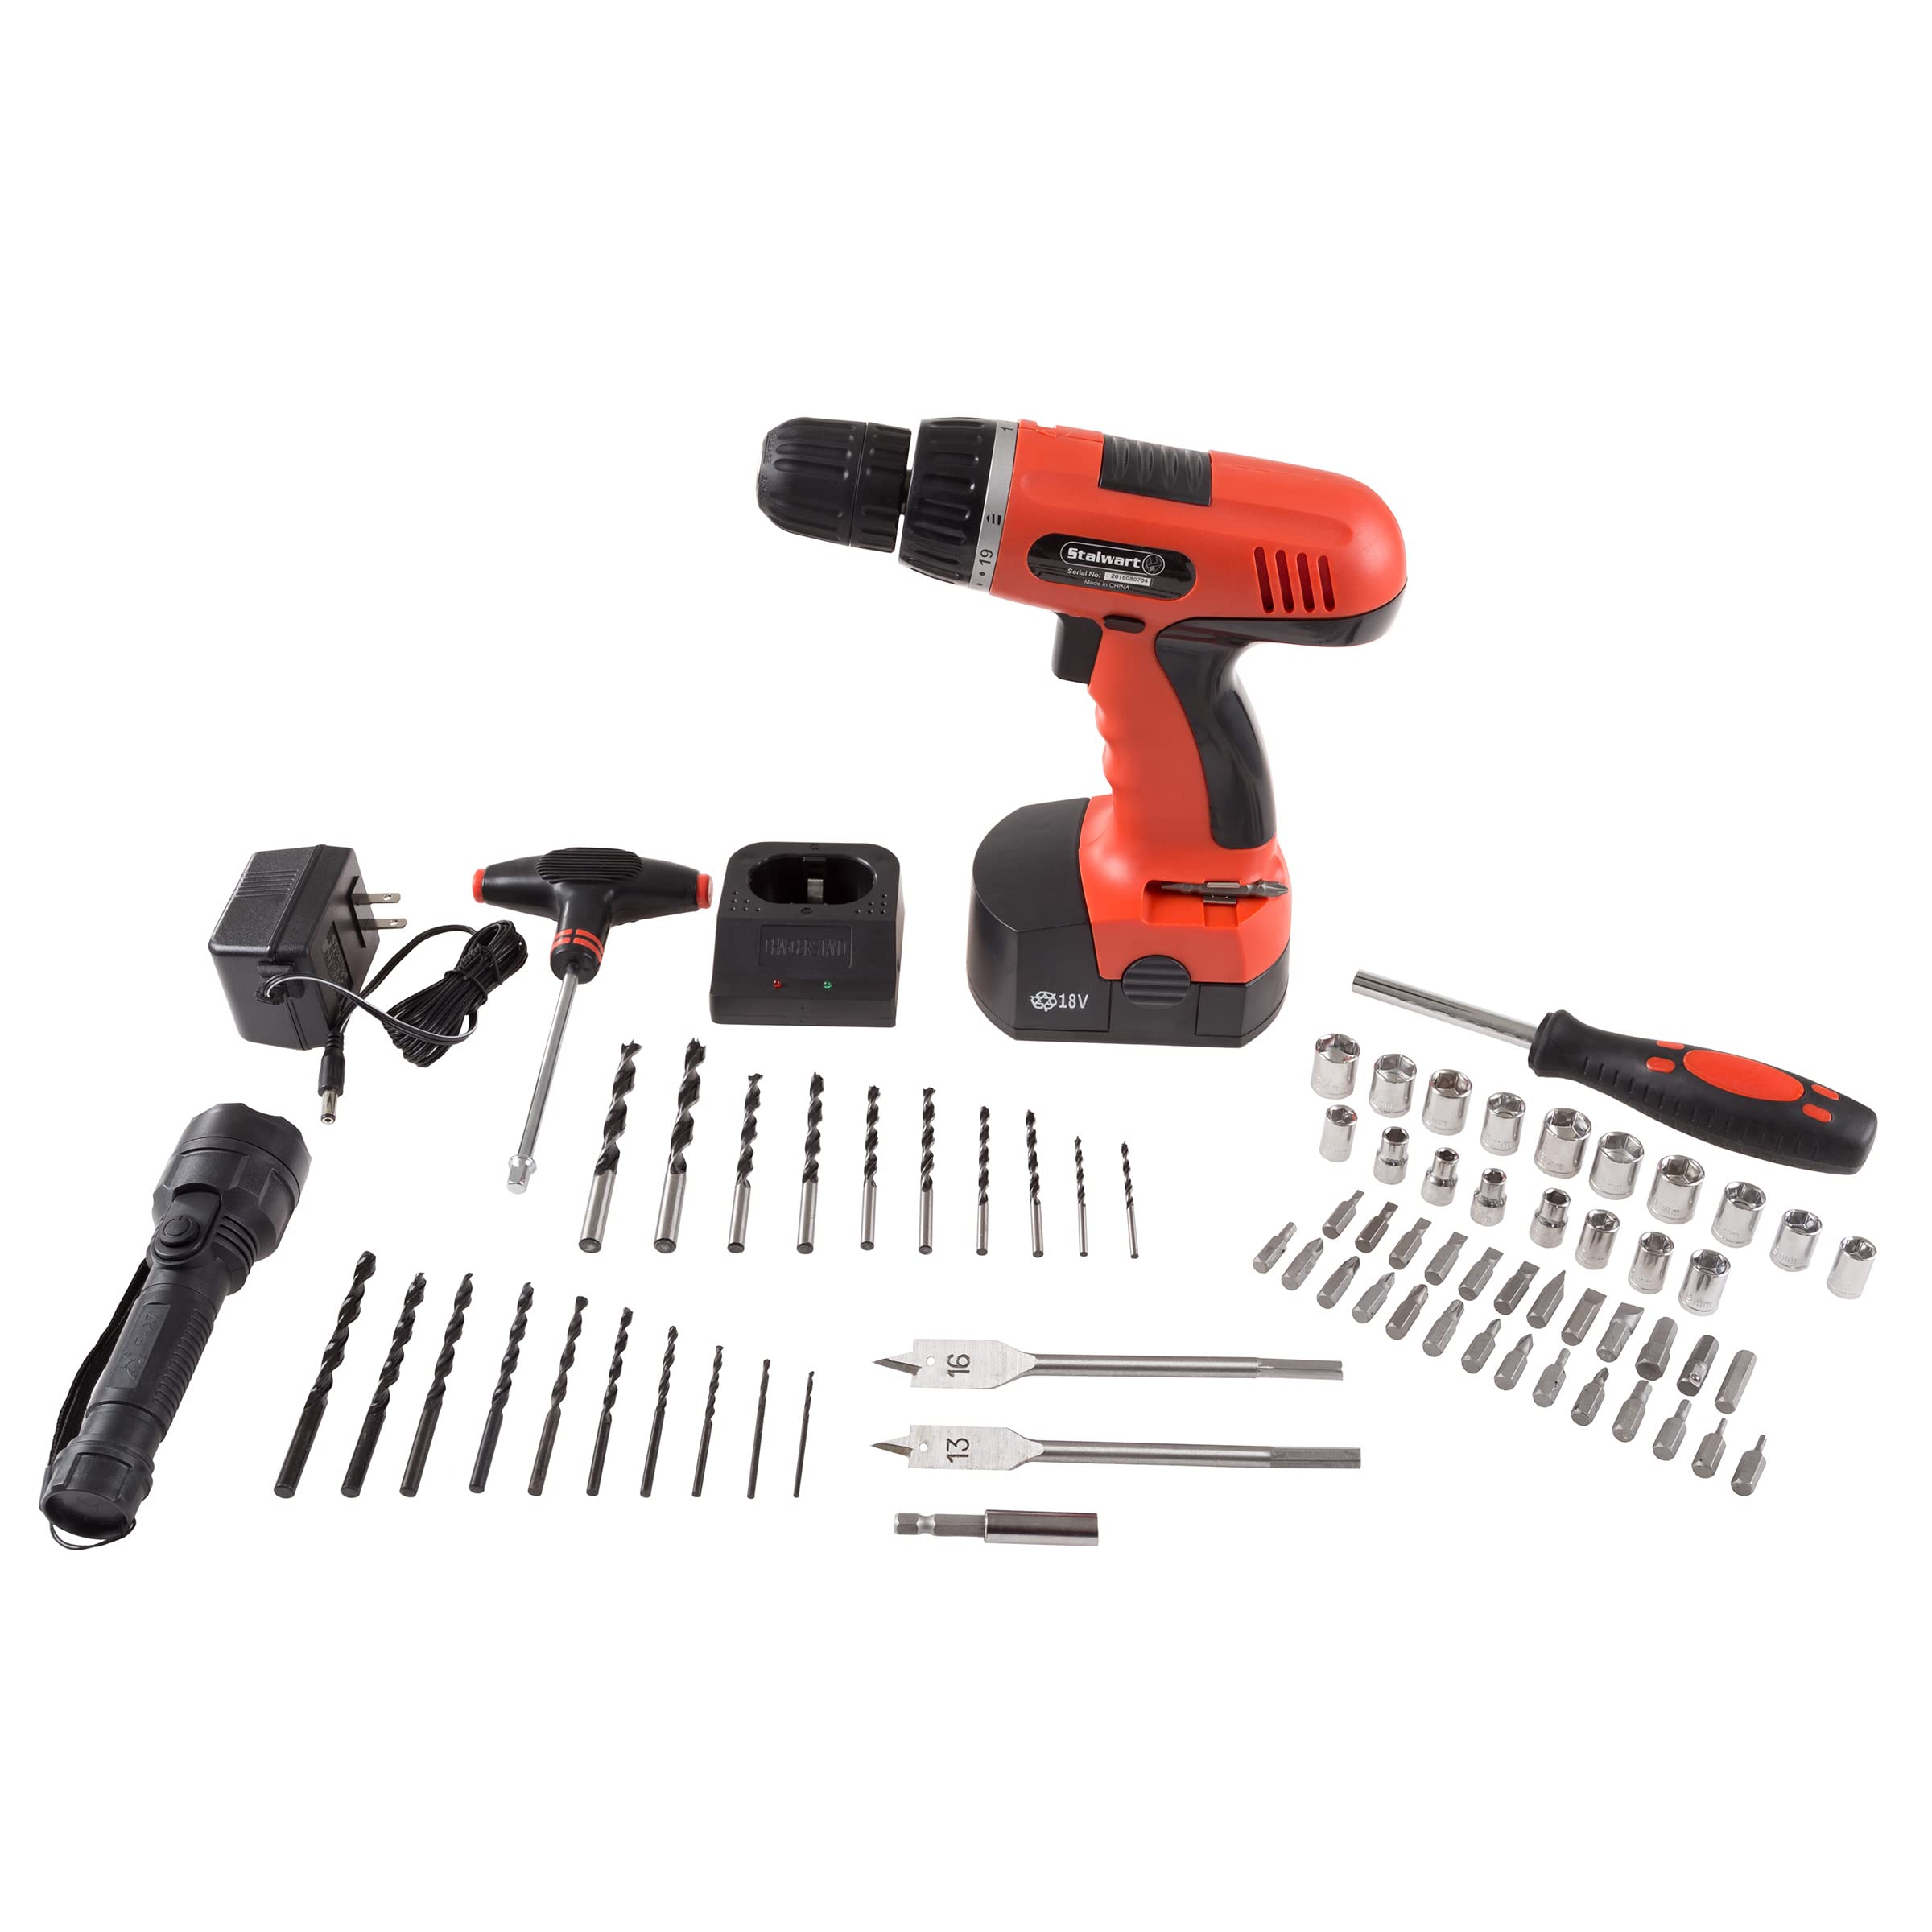 18V Cordless Drill Set - 78-Piece Tool Set with Drill Bits, Sockets, Driver Bits, Flashlight, Rechargeable Battery, and Tool Box by Stalwart (Red)